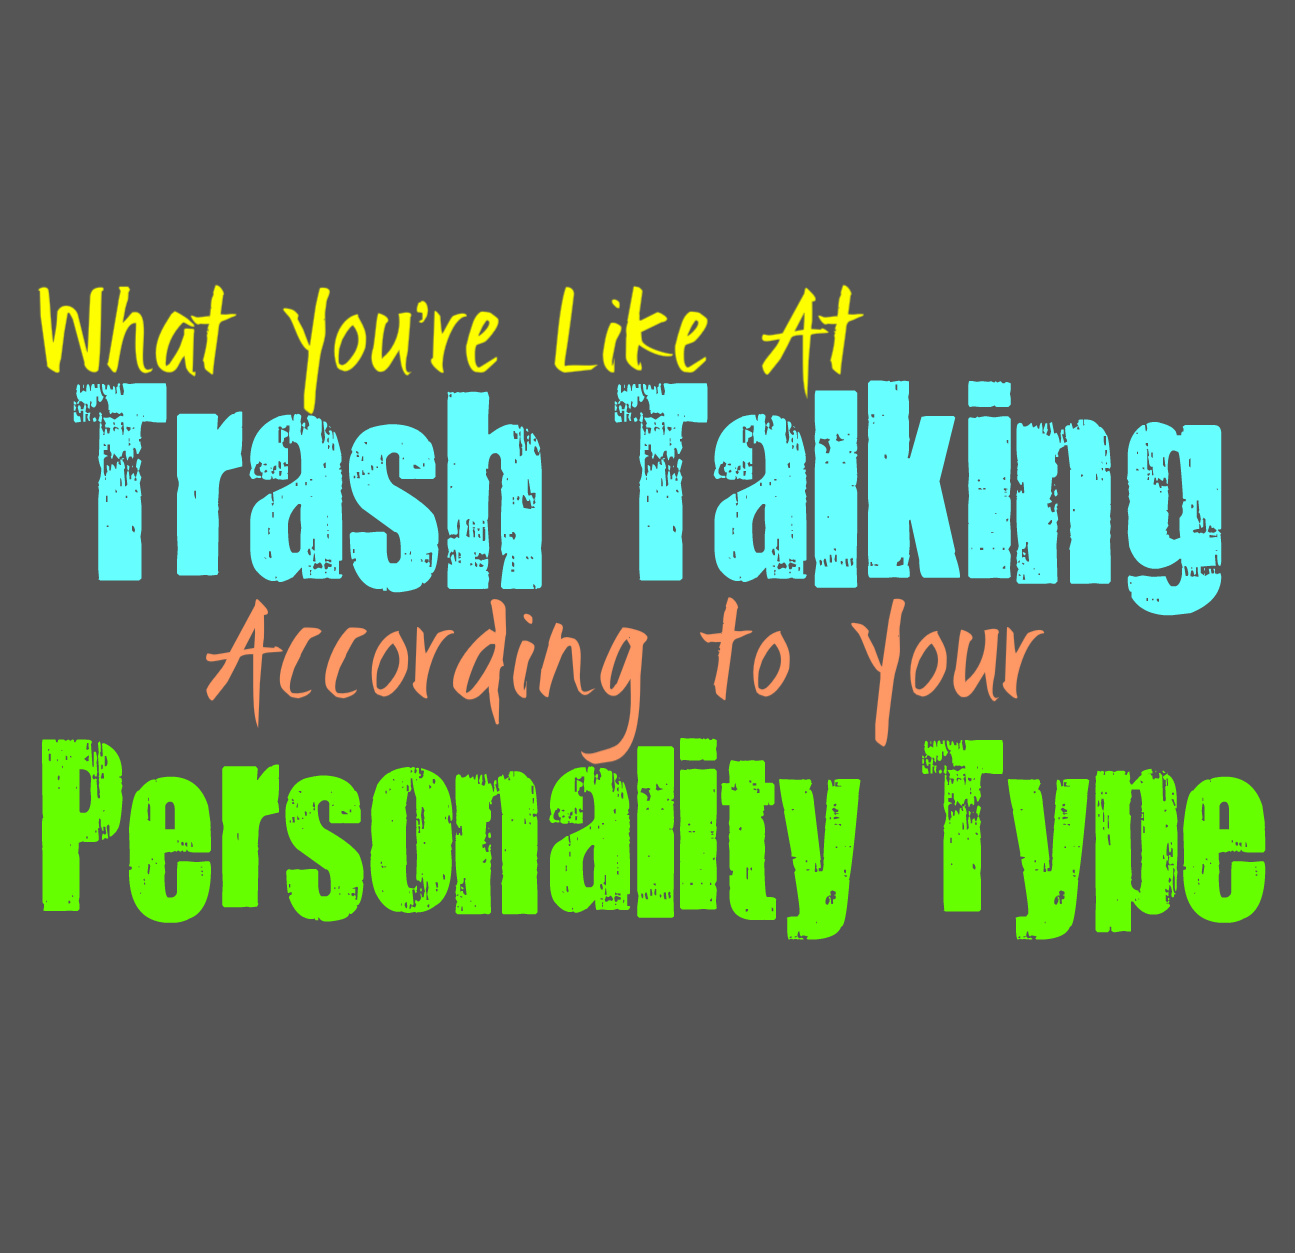 What You're Like At Trash Talking, According to Your Personality